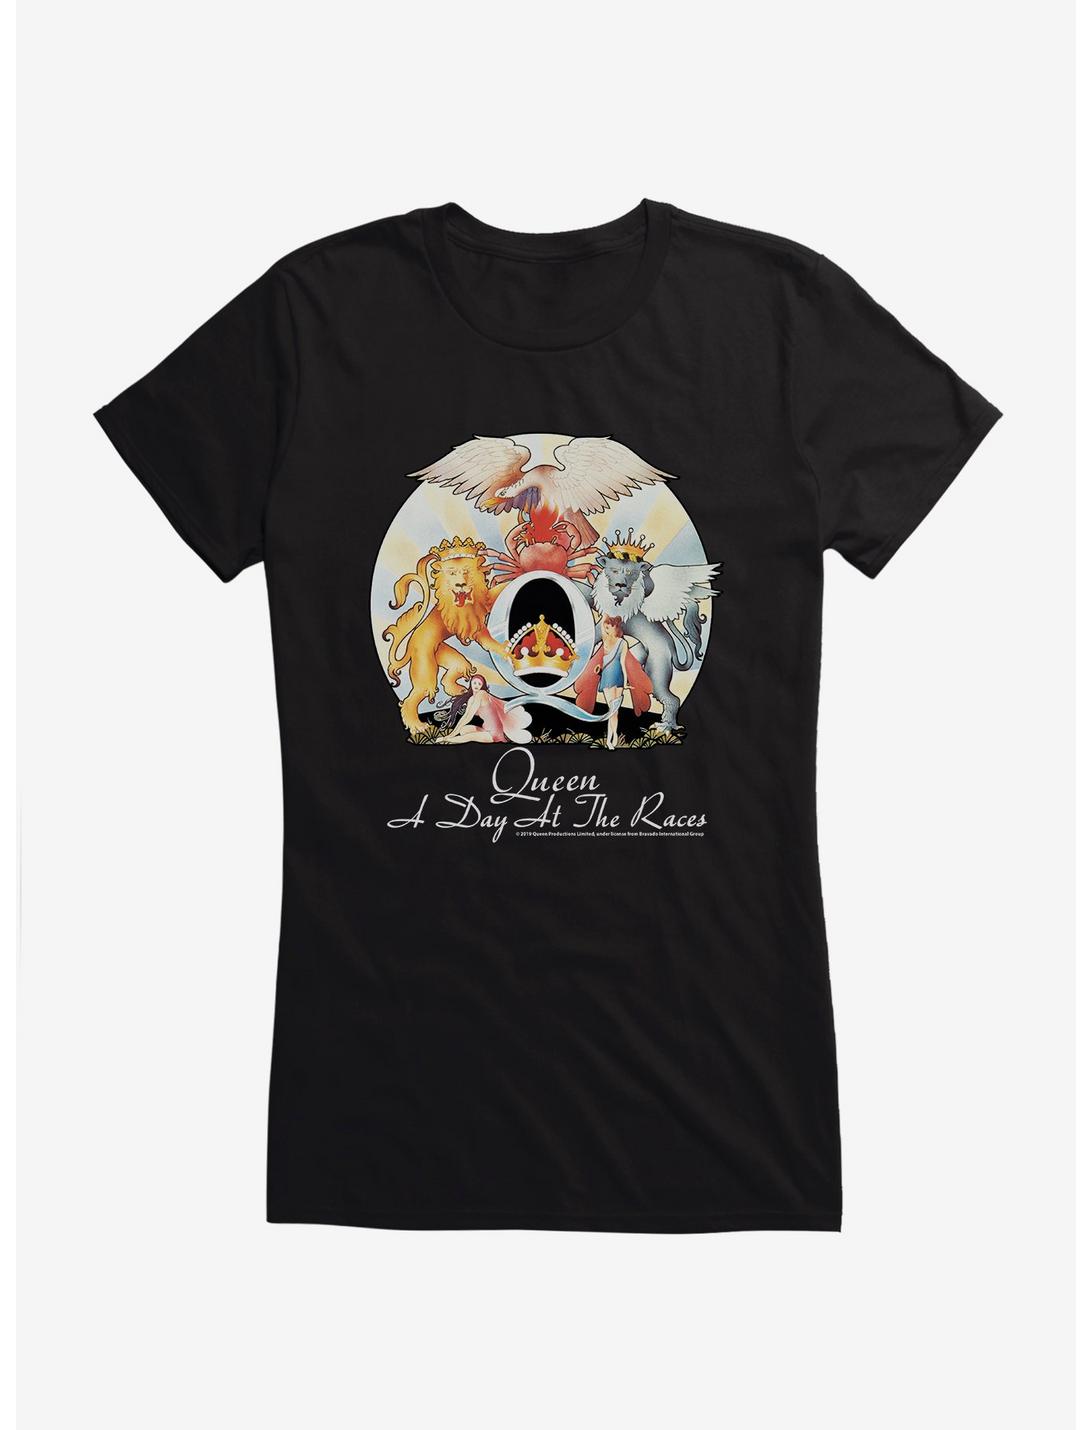 Queen A Day At The Races Girls T-Shirt, BLACK, hi-res